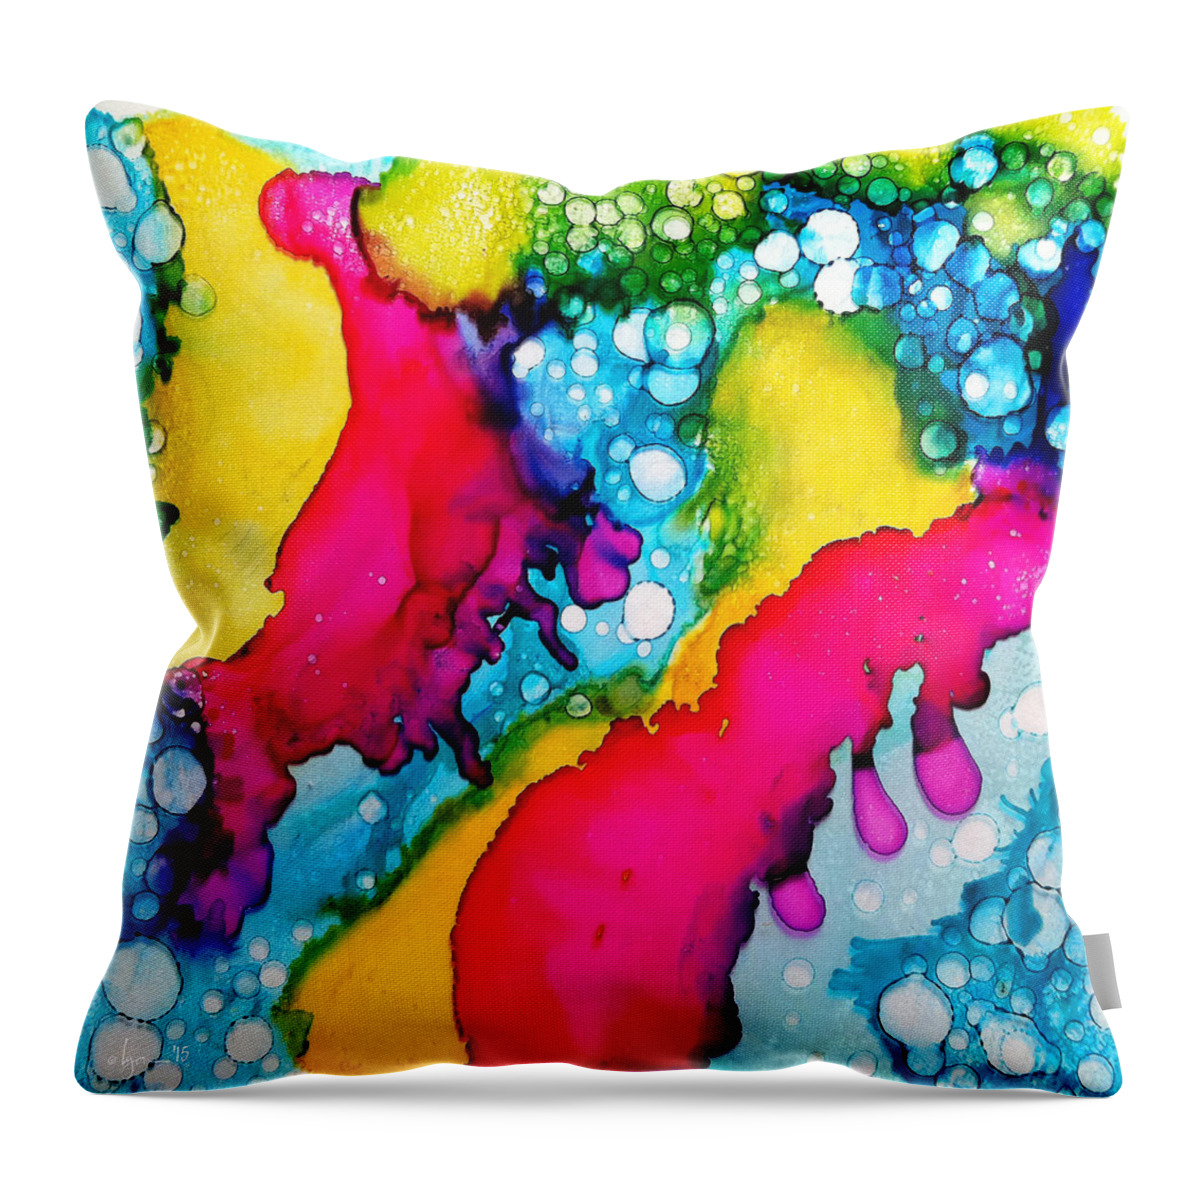 Tropical Throw Pillow featuring the painting Drippy by Angela Treat Lyon